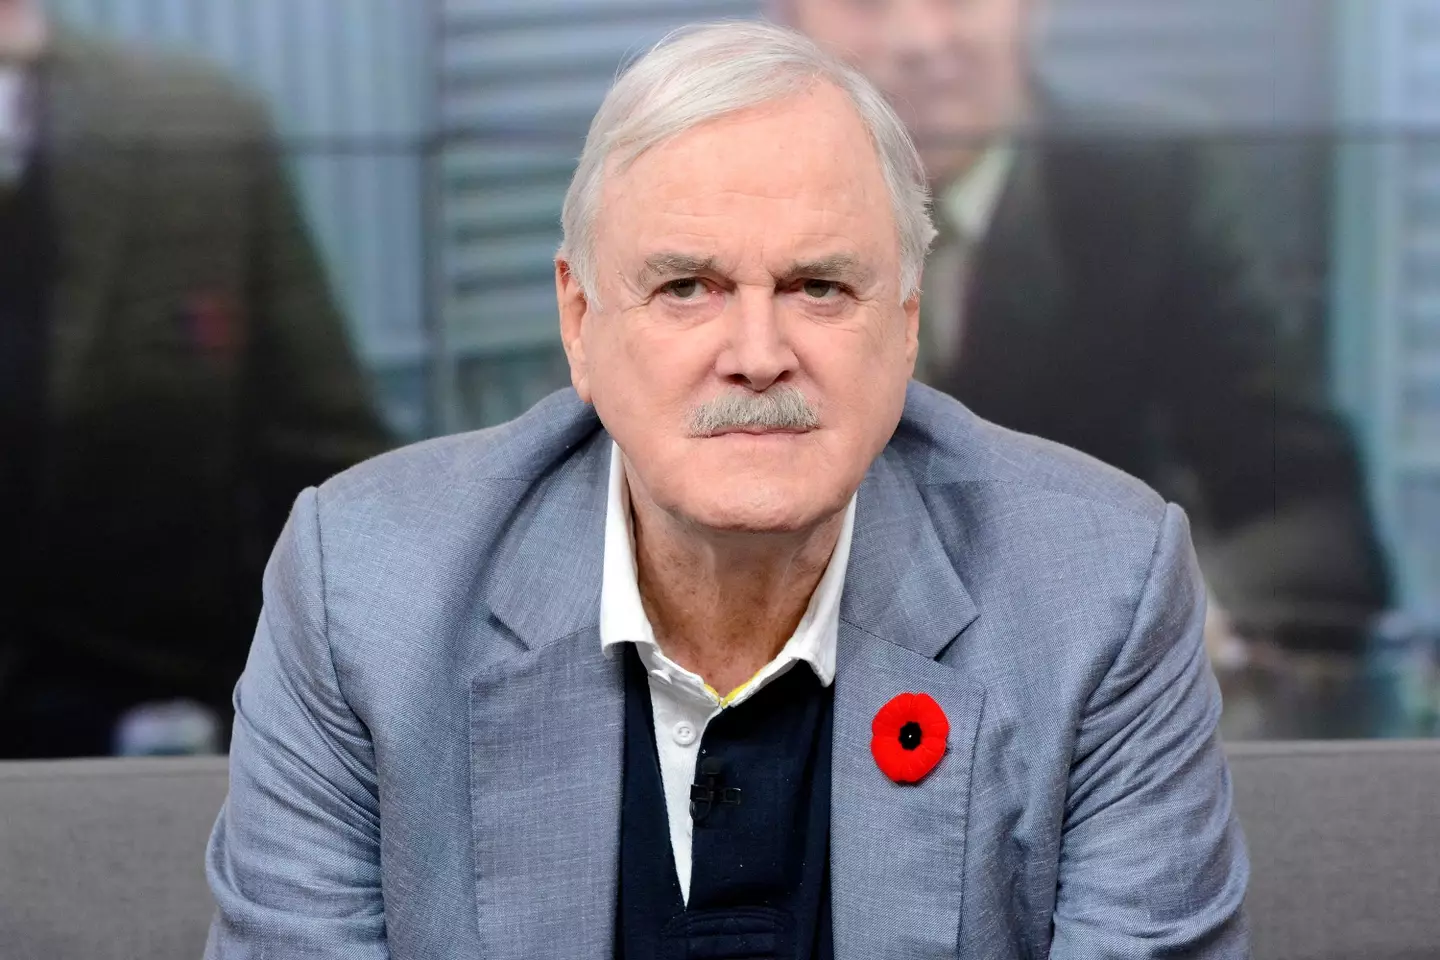 The actor and comedian is working on a Channel 4 documentary titled John Cleese: Cancel Me.